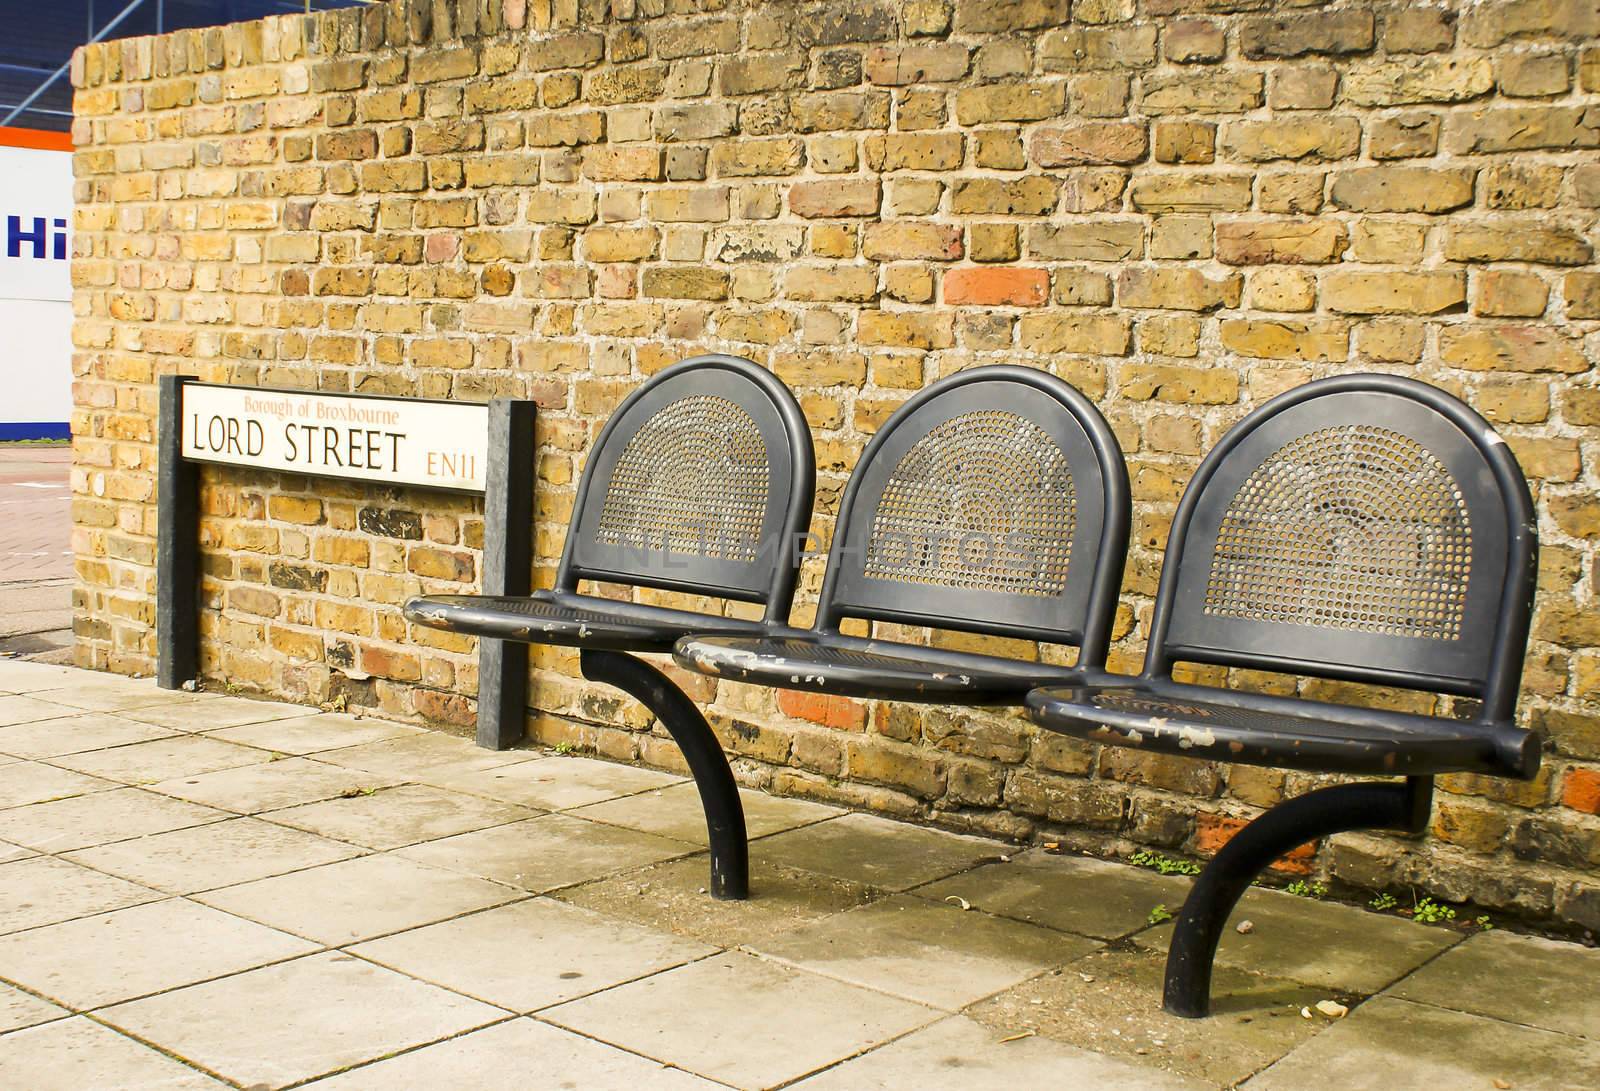 Seats at the bus stop